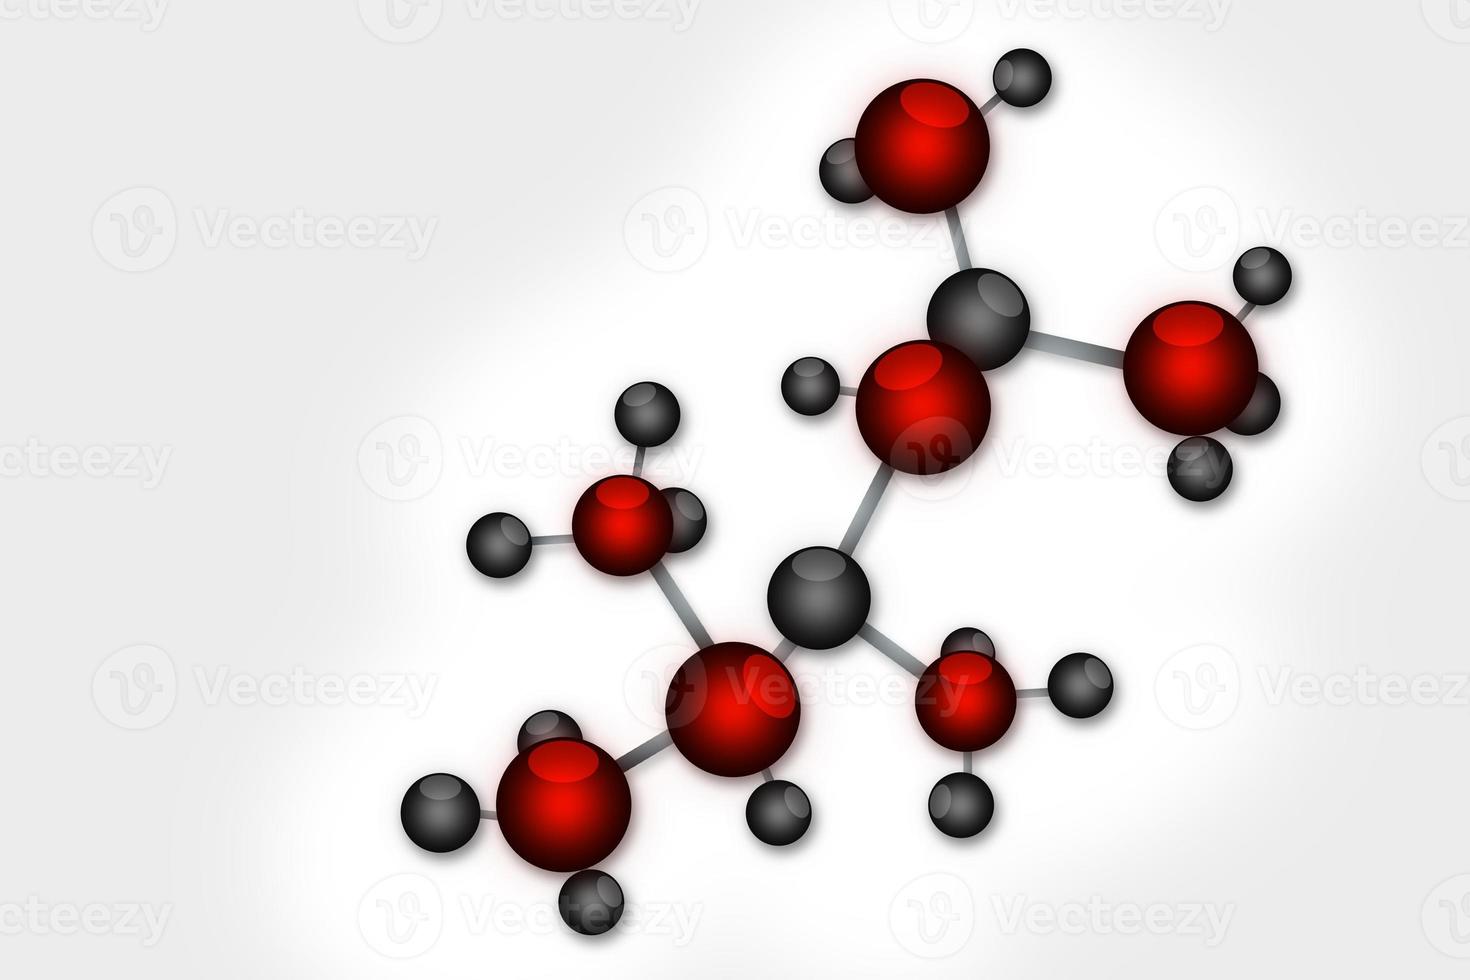 Digital illustration of molecules in abstract background photo